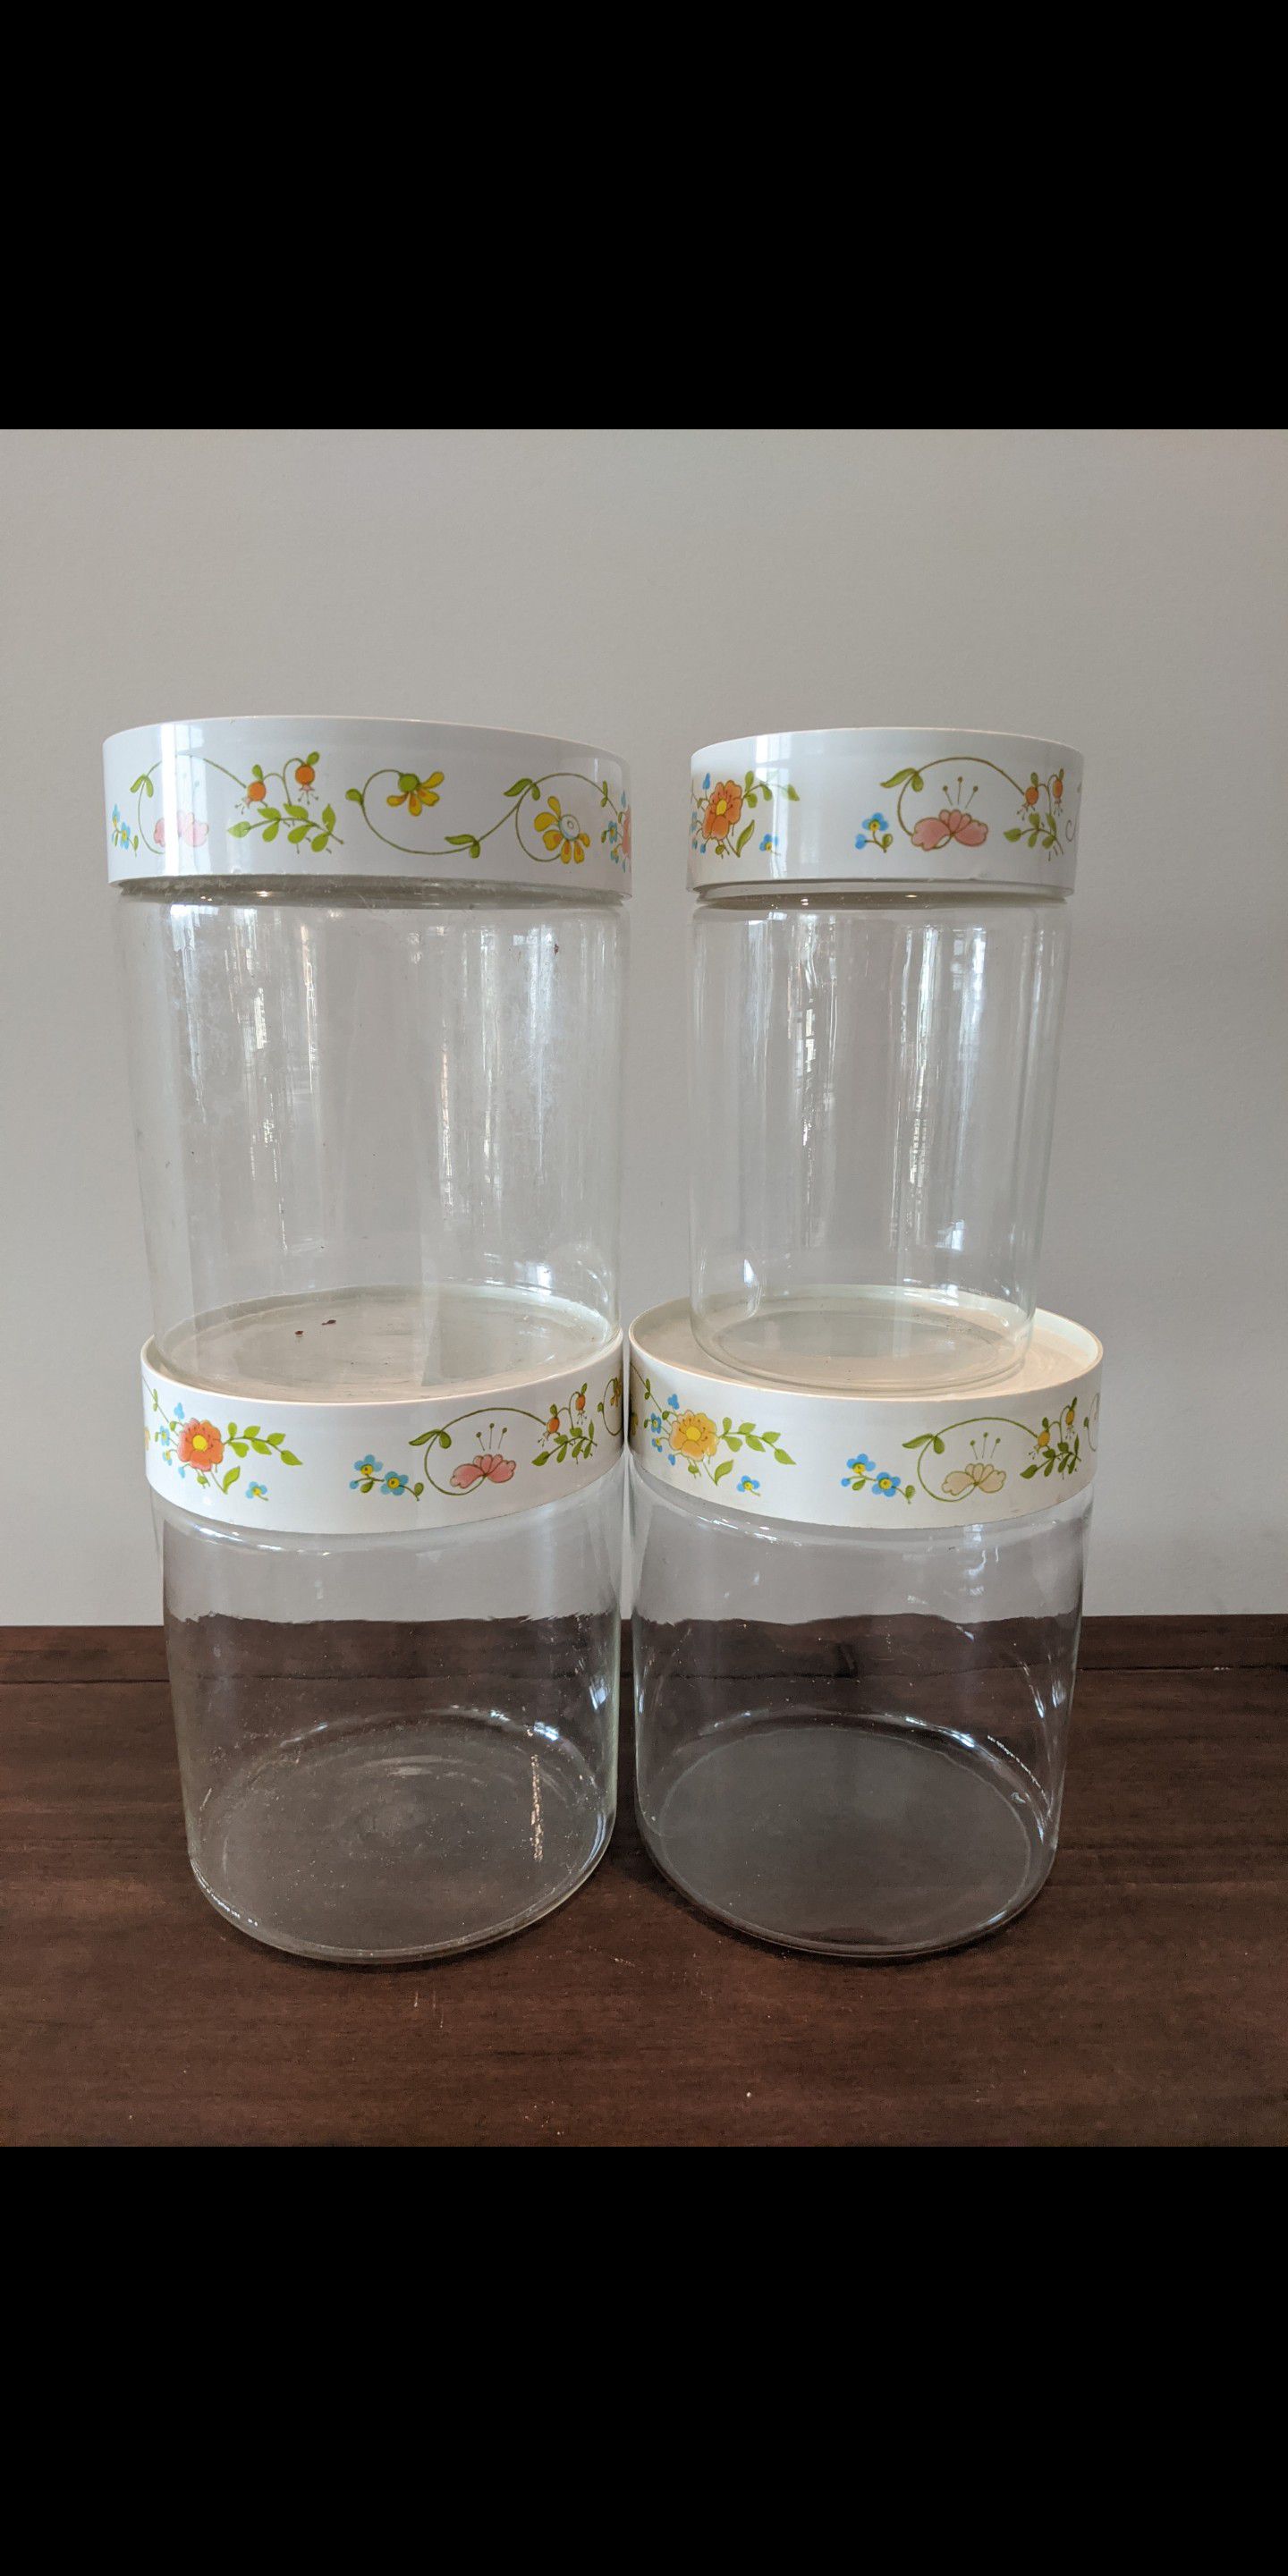 4 Pyrex Glass Canisters